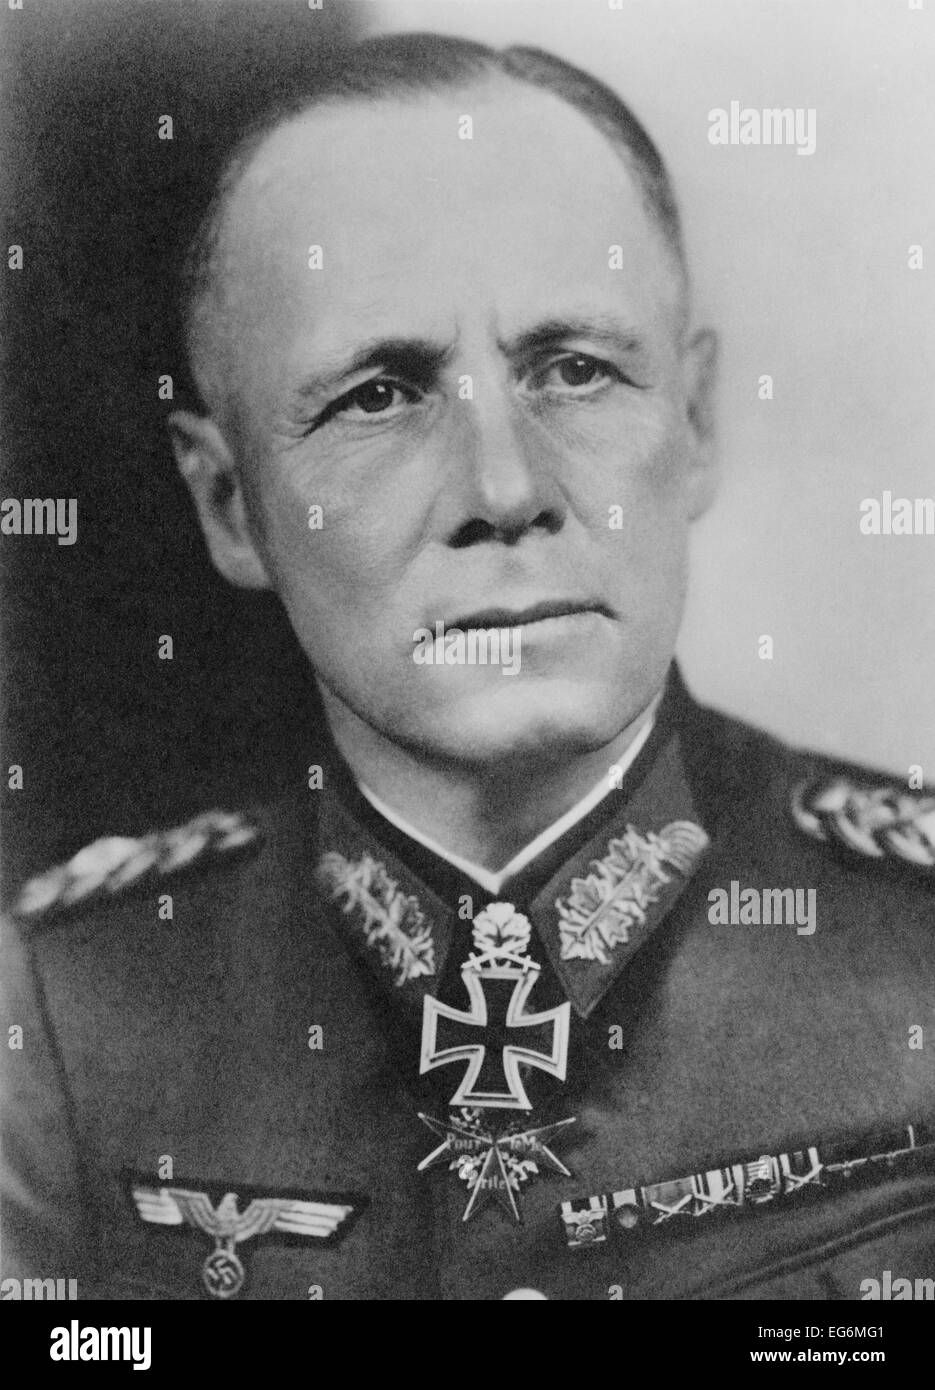 Field Marshall Erwin Rommel, German commander in France and North Africa during World War 2. Rommel had been part of Hitler's Stock Photo